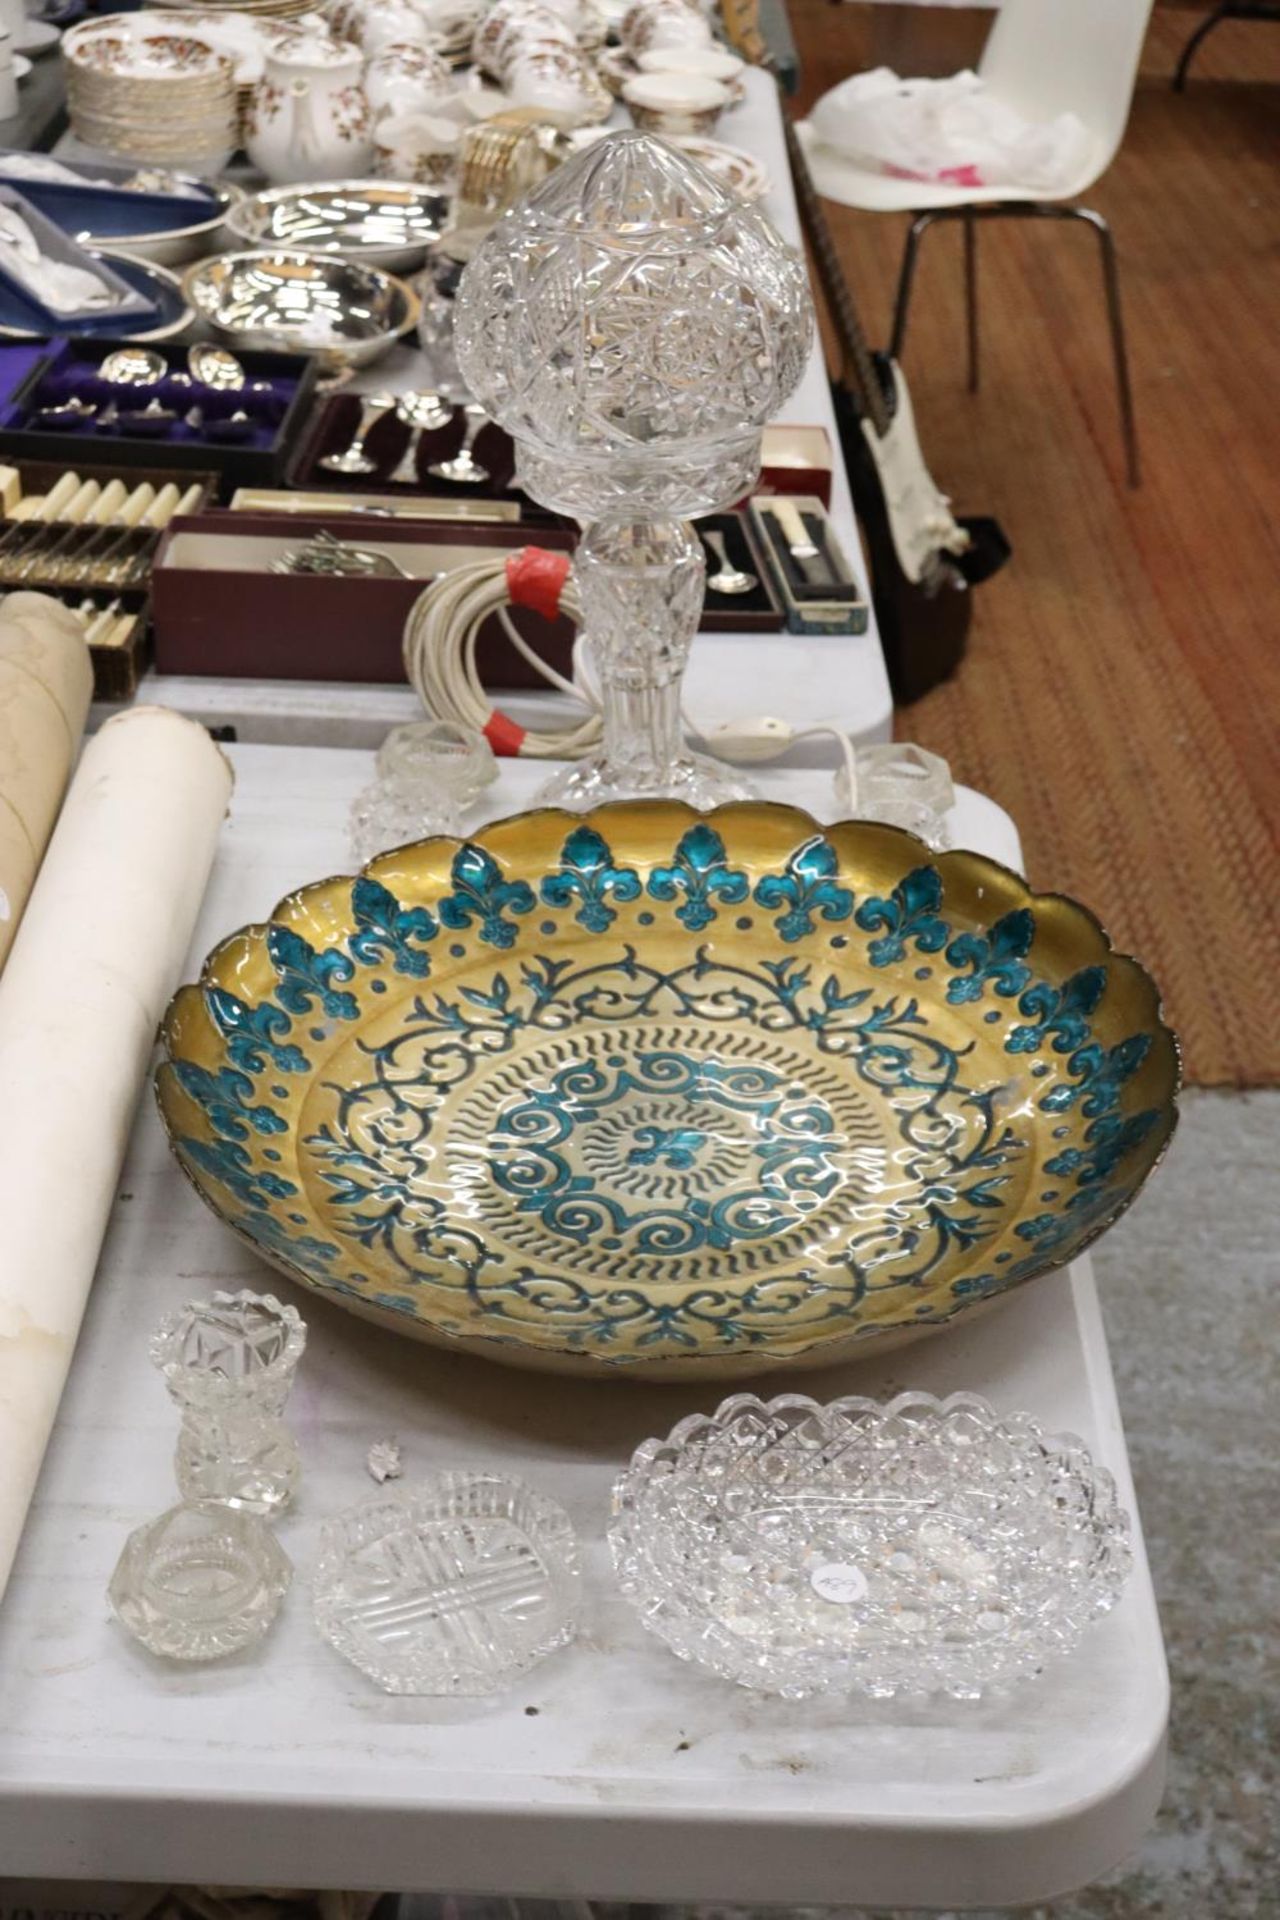 A QUANTITY OF GLASSWARE TO INCLUDE A MUSHROOM LAMP, BUTTER DISH, CANDLE HOLDERS AND AN ORNATE GOLD